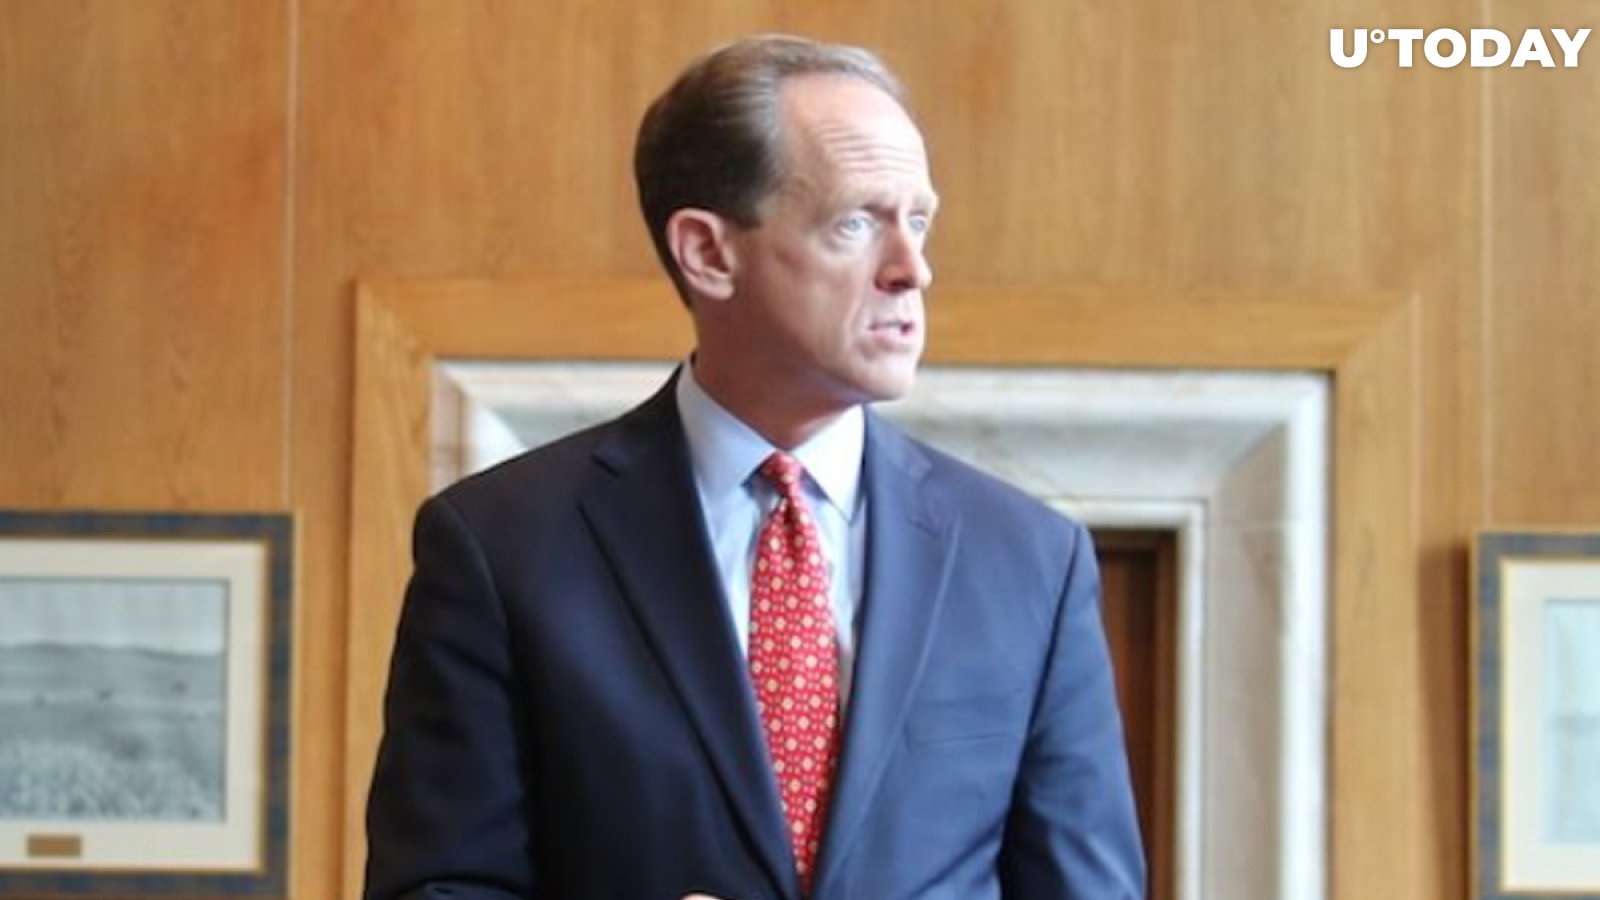 U.S. Senator Pat Toomey Sees "Big Opportunity" for the U.S. in China Crypto Ban